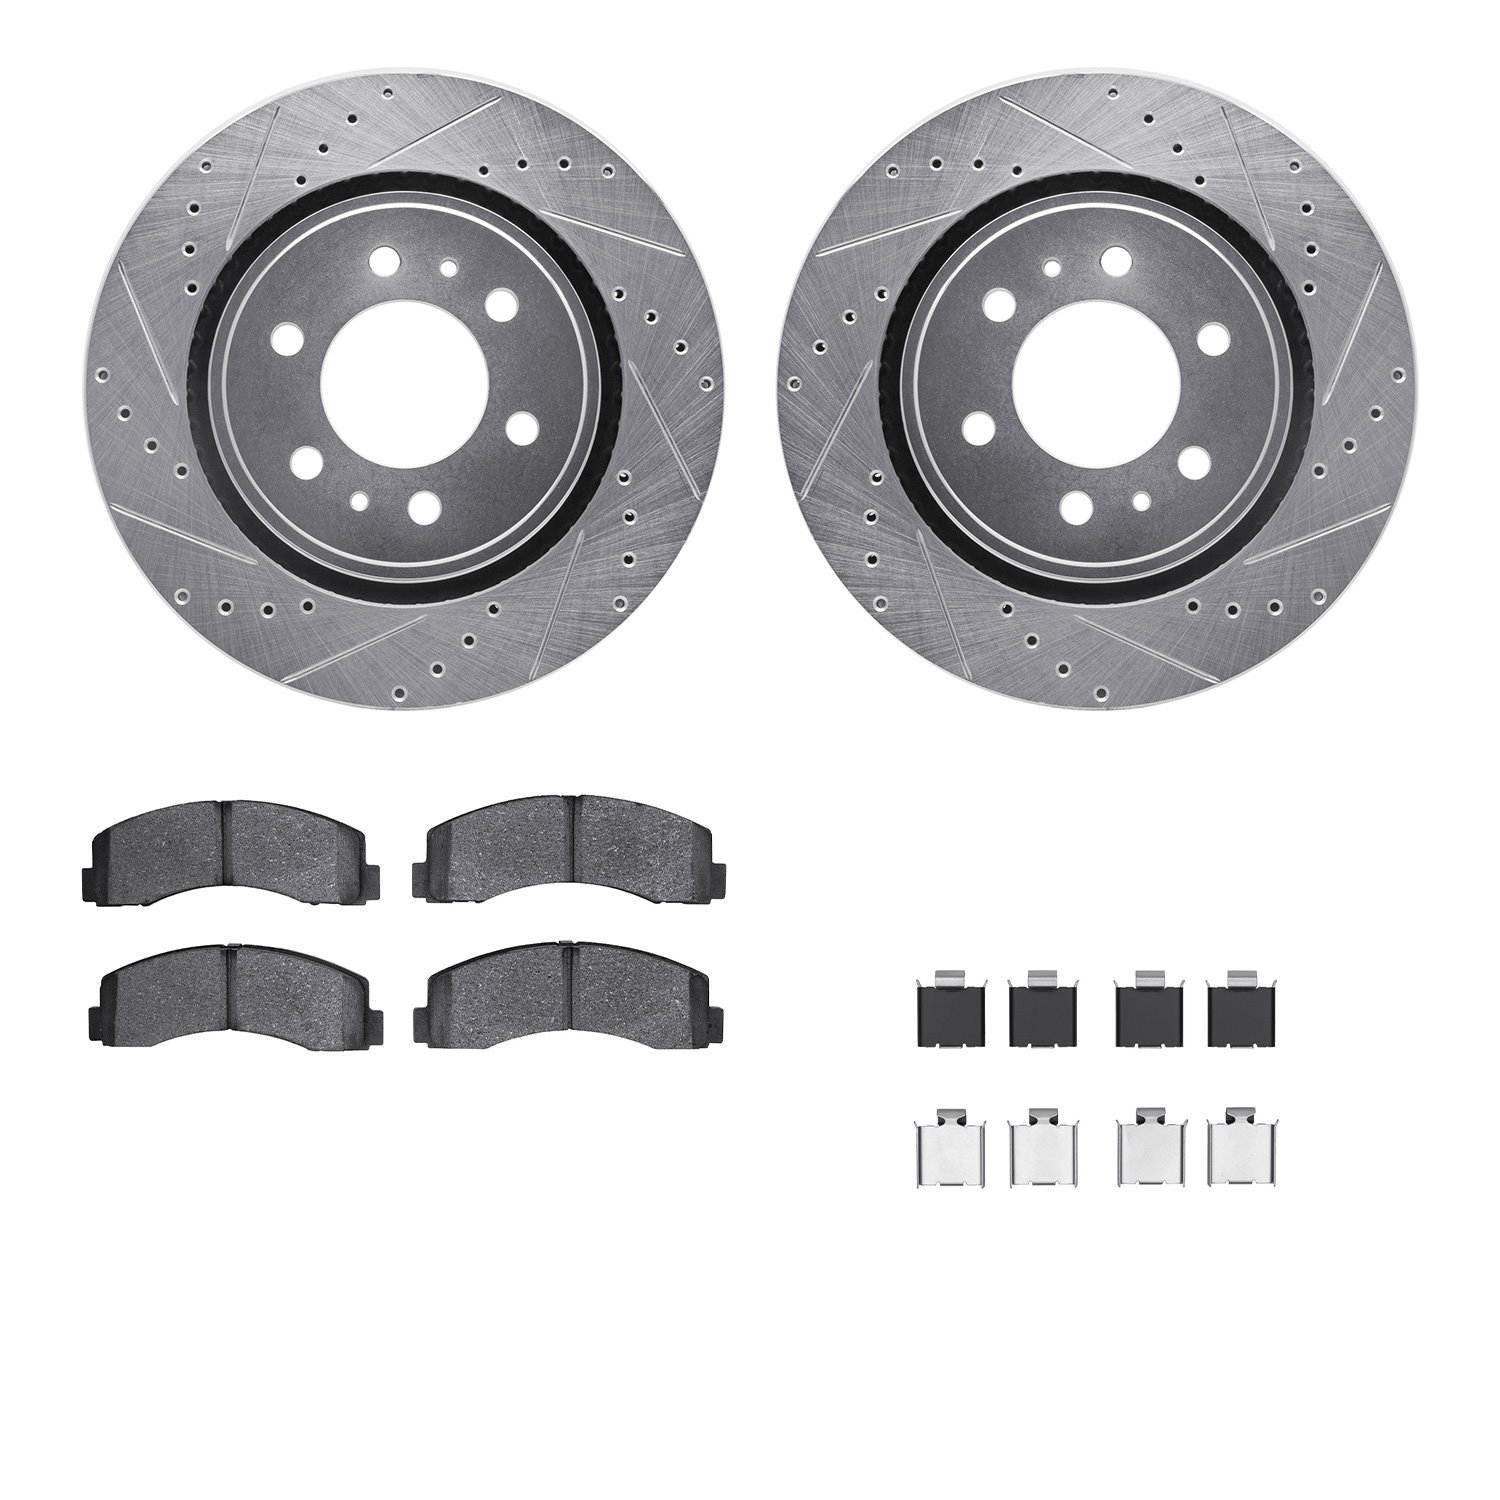 7412-54090 Drilled/Slotted Brake Rotors with Ultimate-Duty Brake Pads Kit & Hardware [Silver], 2010-2021 Ford/Lincoln/Mercury/Ma